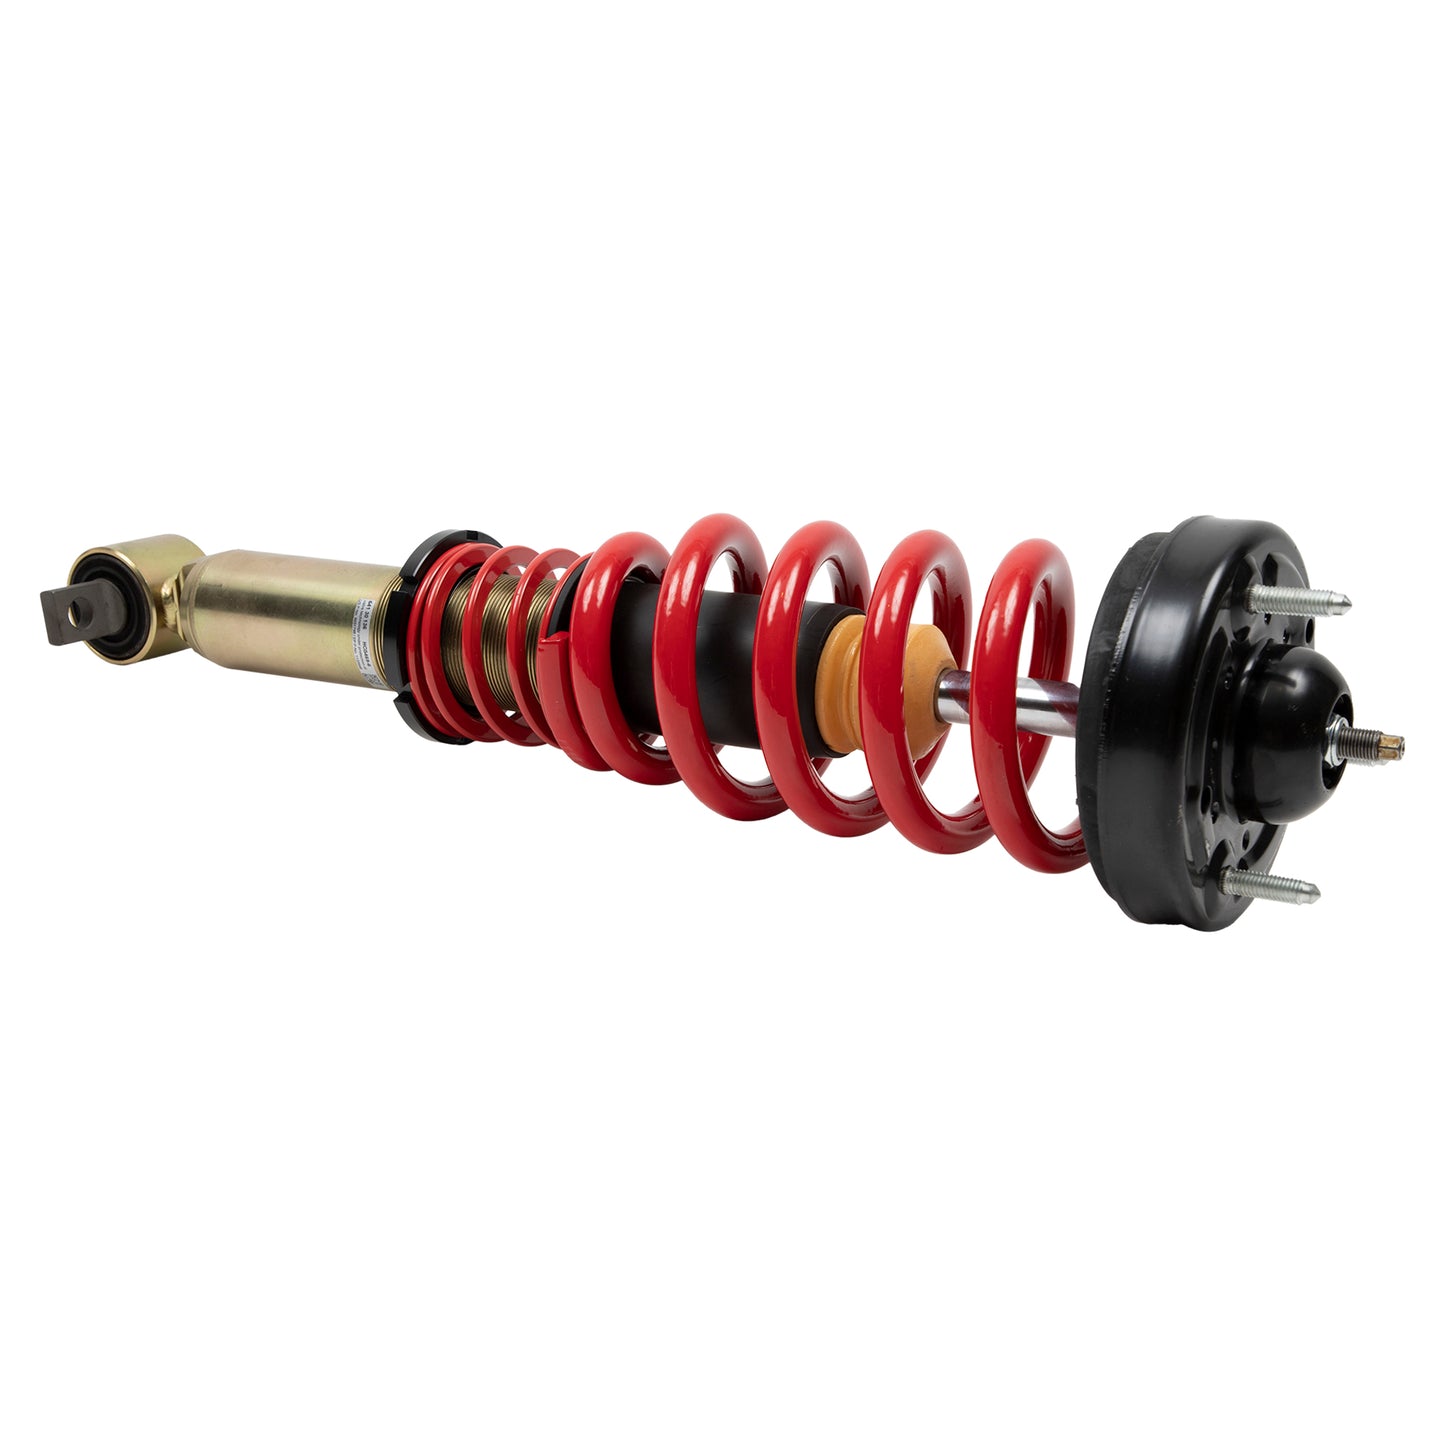 BELLTECH 16001 COILOVER KIT Independent Compression & Rebound Adjustable 1-3 in. Height Adjustable Drop 2015-2018 Ford F150 (All Cabs) 2wd/4wd Coilover Struts only (Adj. Rebound & Compression) 1 in.-3 in. Drop